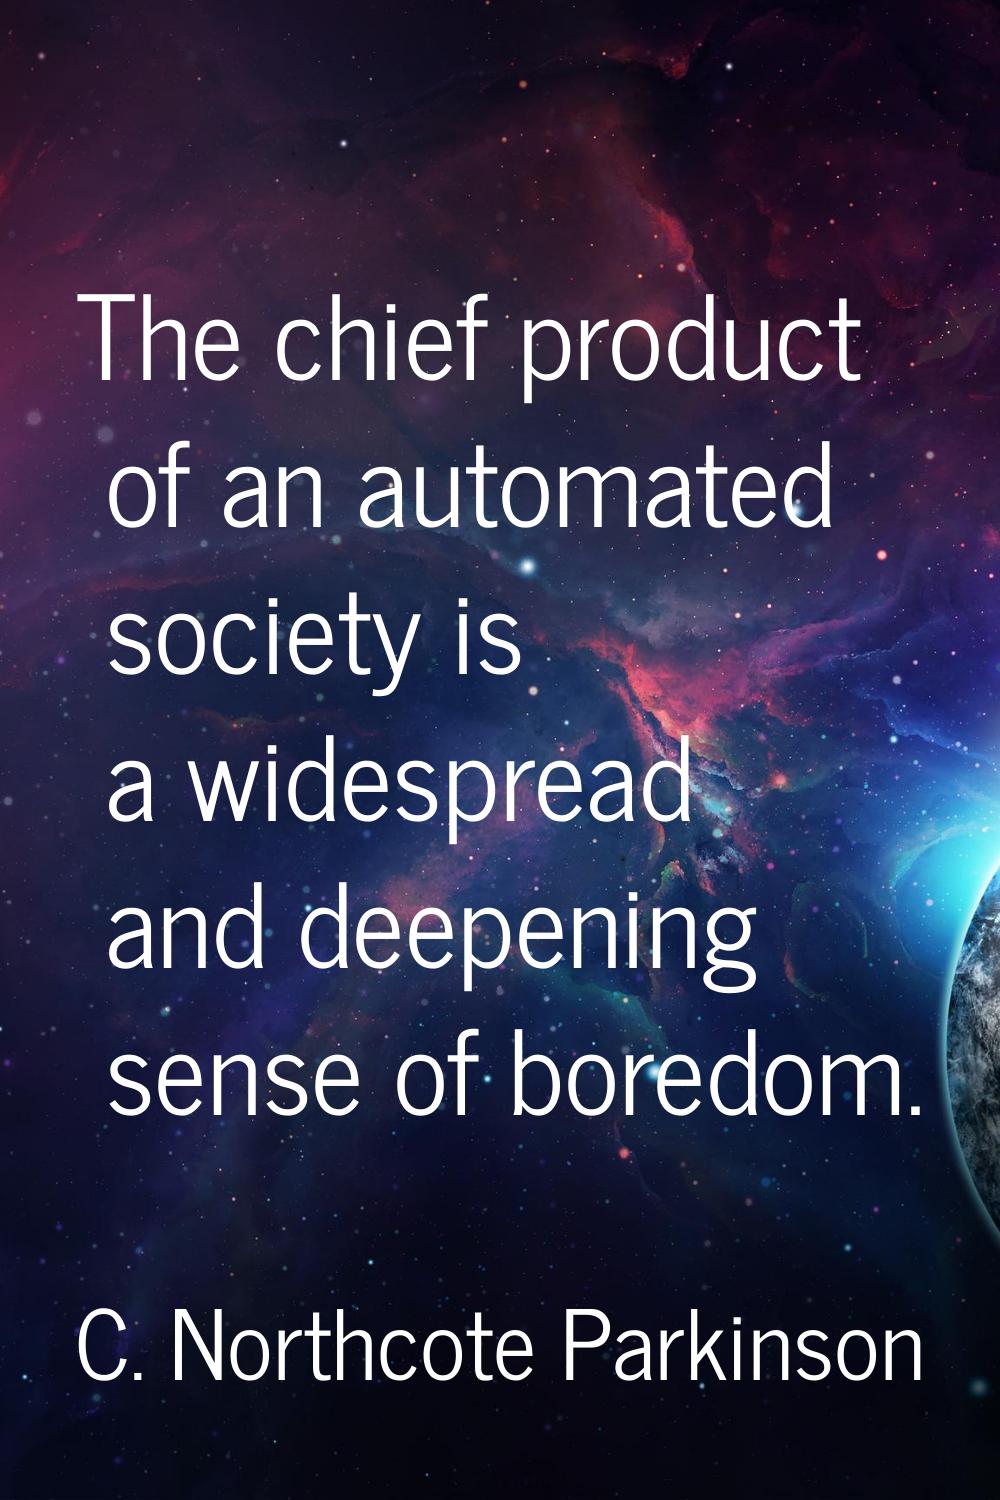 The chief product of an automated society is a widespread and deepening sense of boredom.